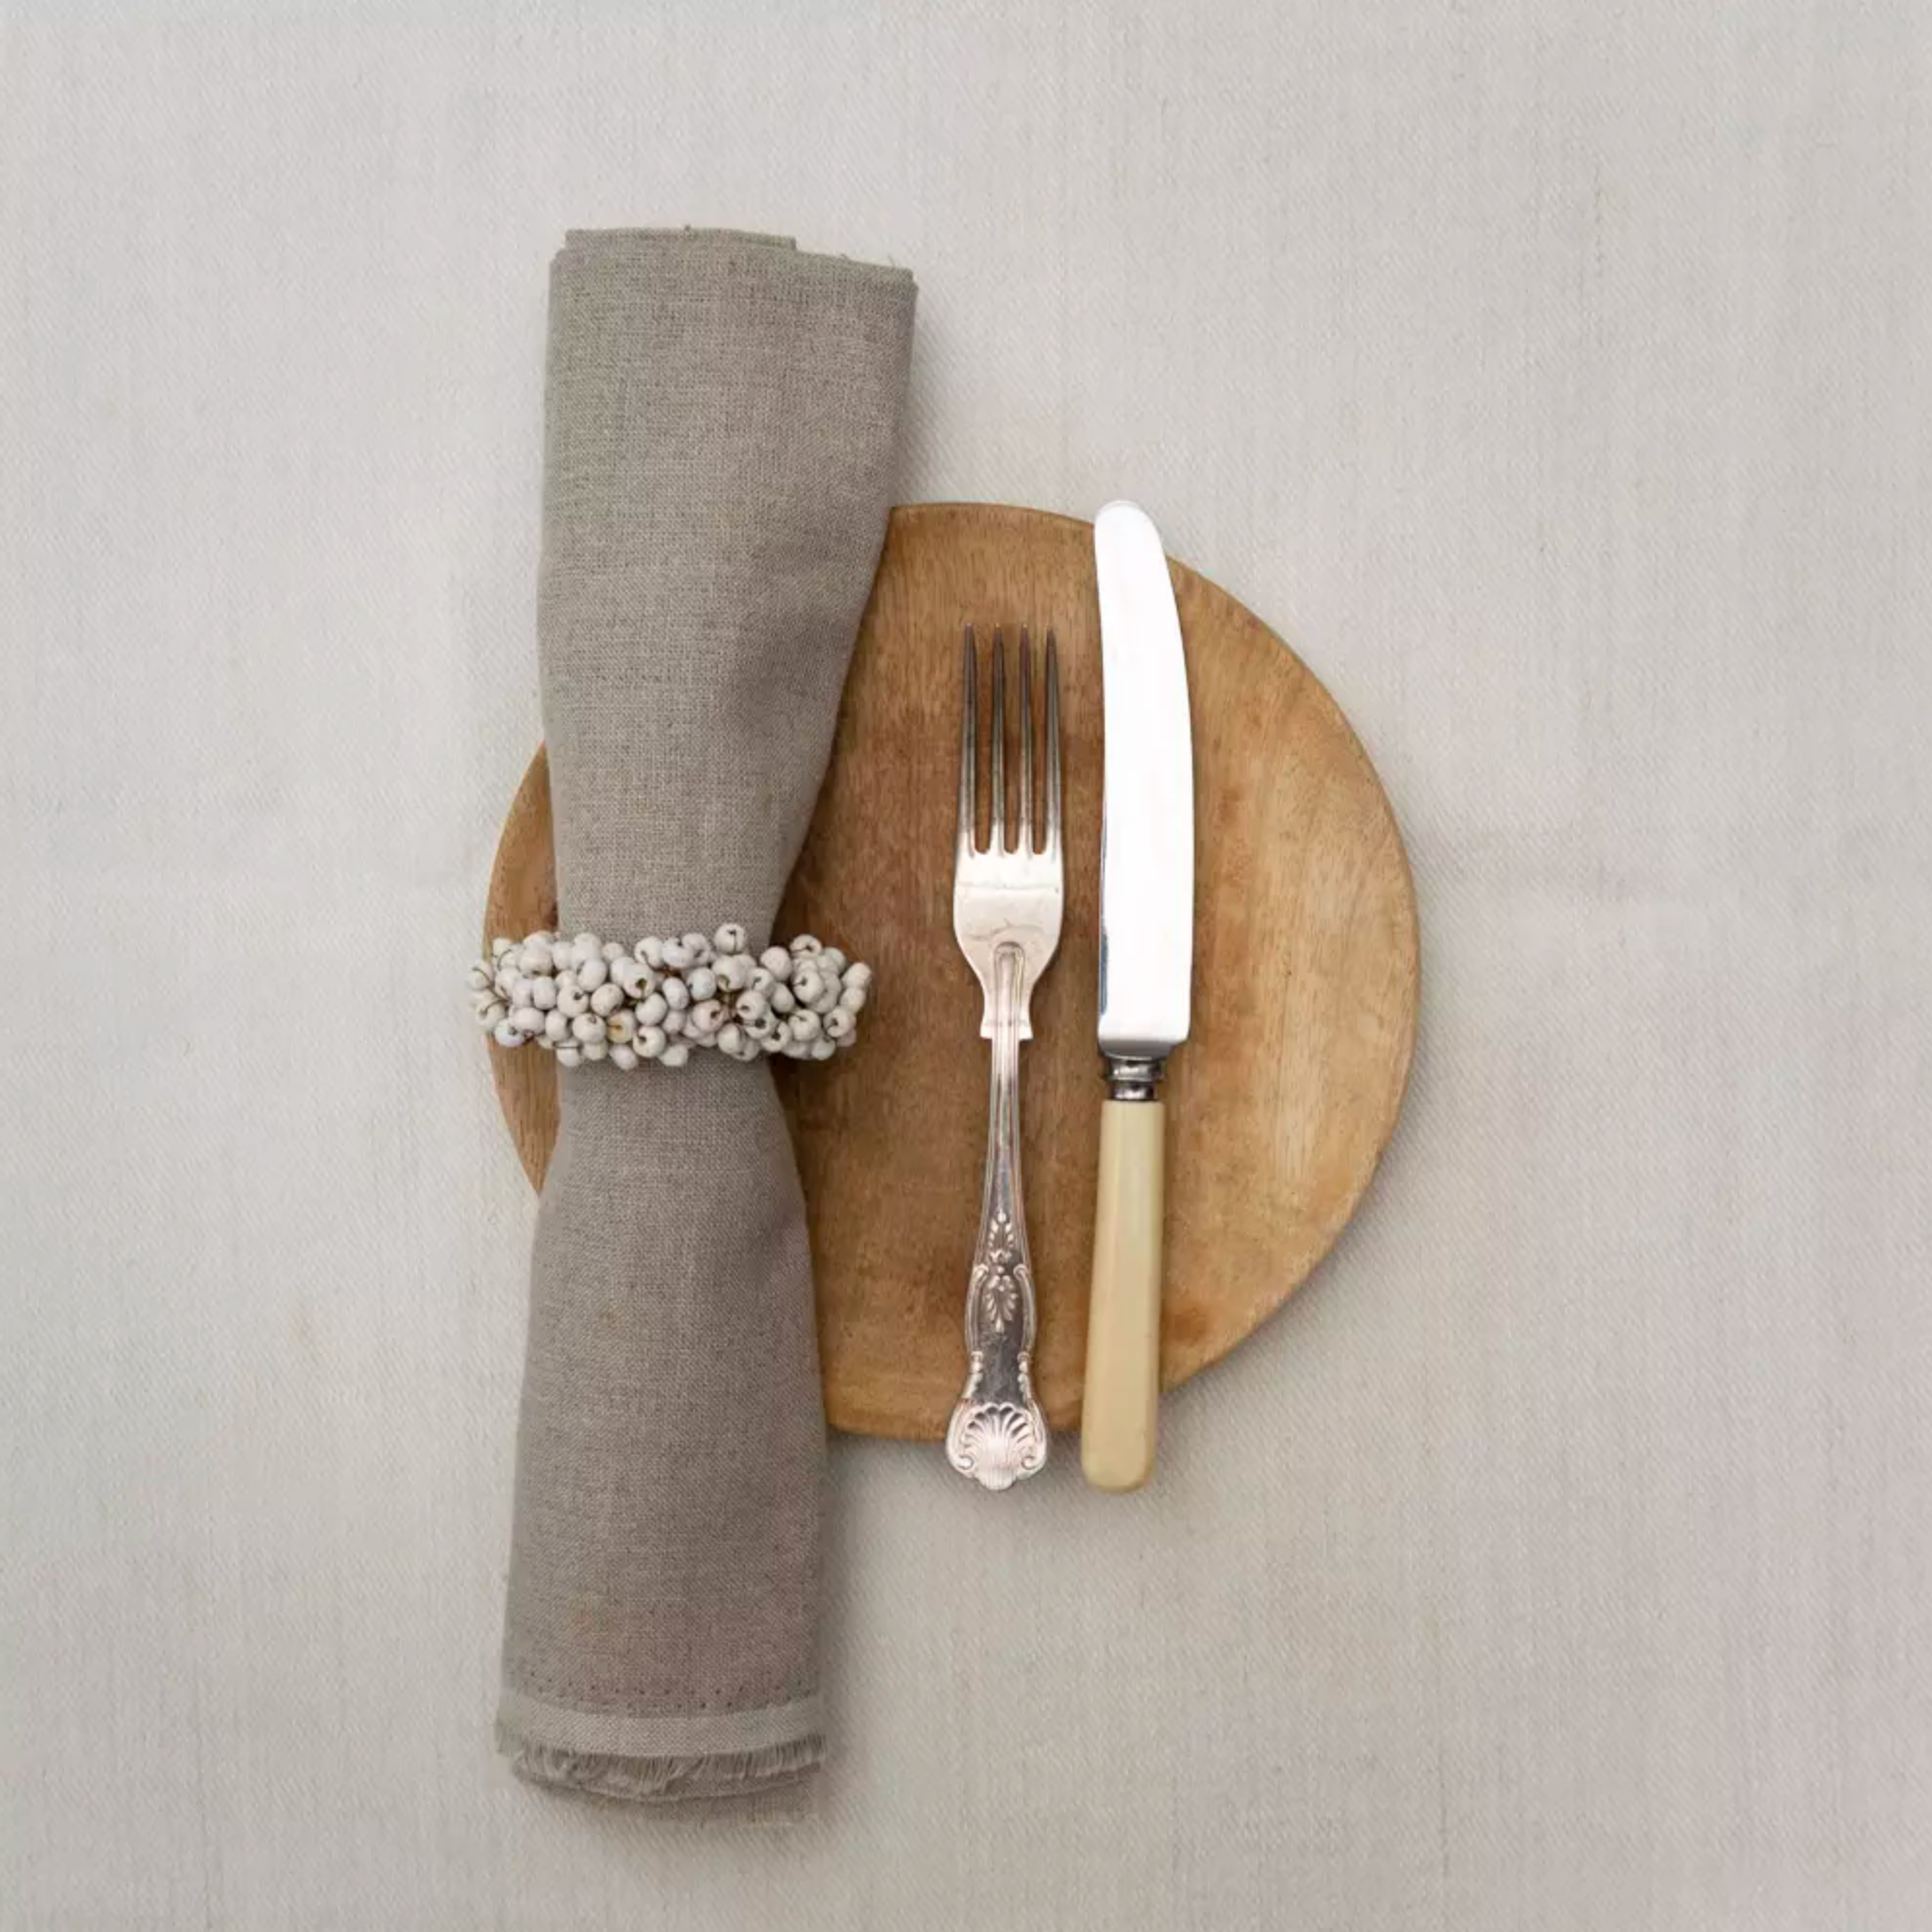 Wooden Napkin Ring with White Berries on a wooden plate with a knife and fork.